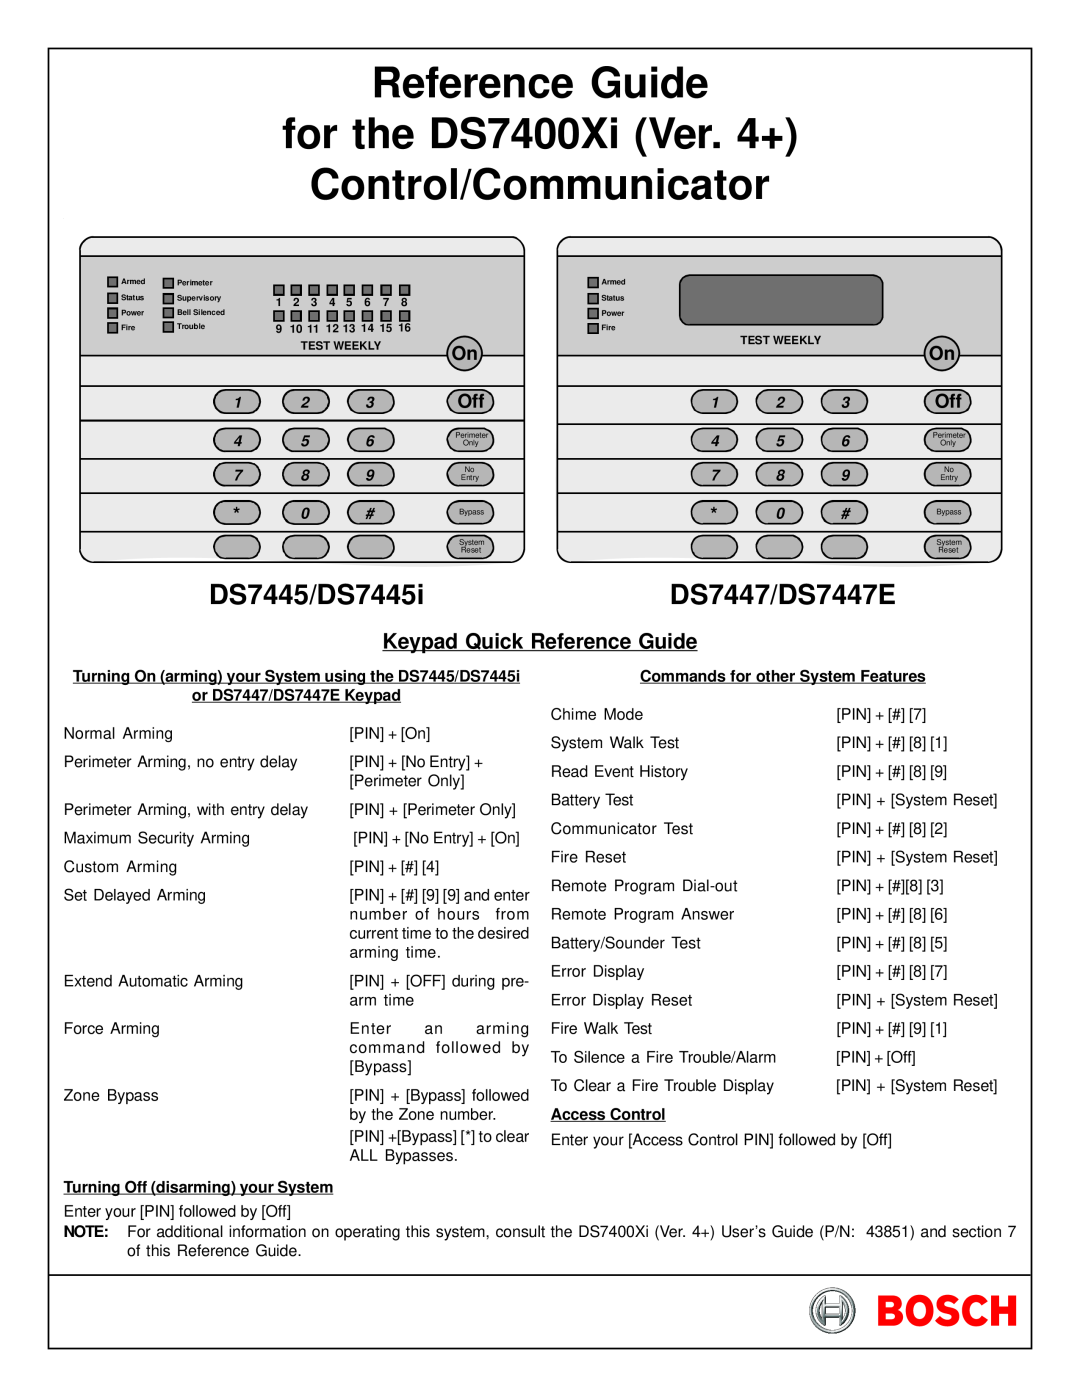 Bosch Appliances DS7447E, DS7445I manual Reference Guide for the DS7400Xi Ver. 4+, Control/Communicator, DS7445/DS7445i 